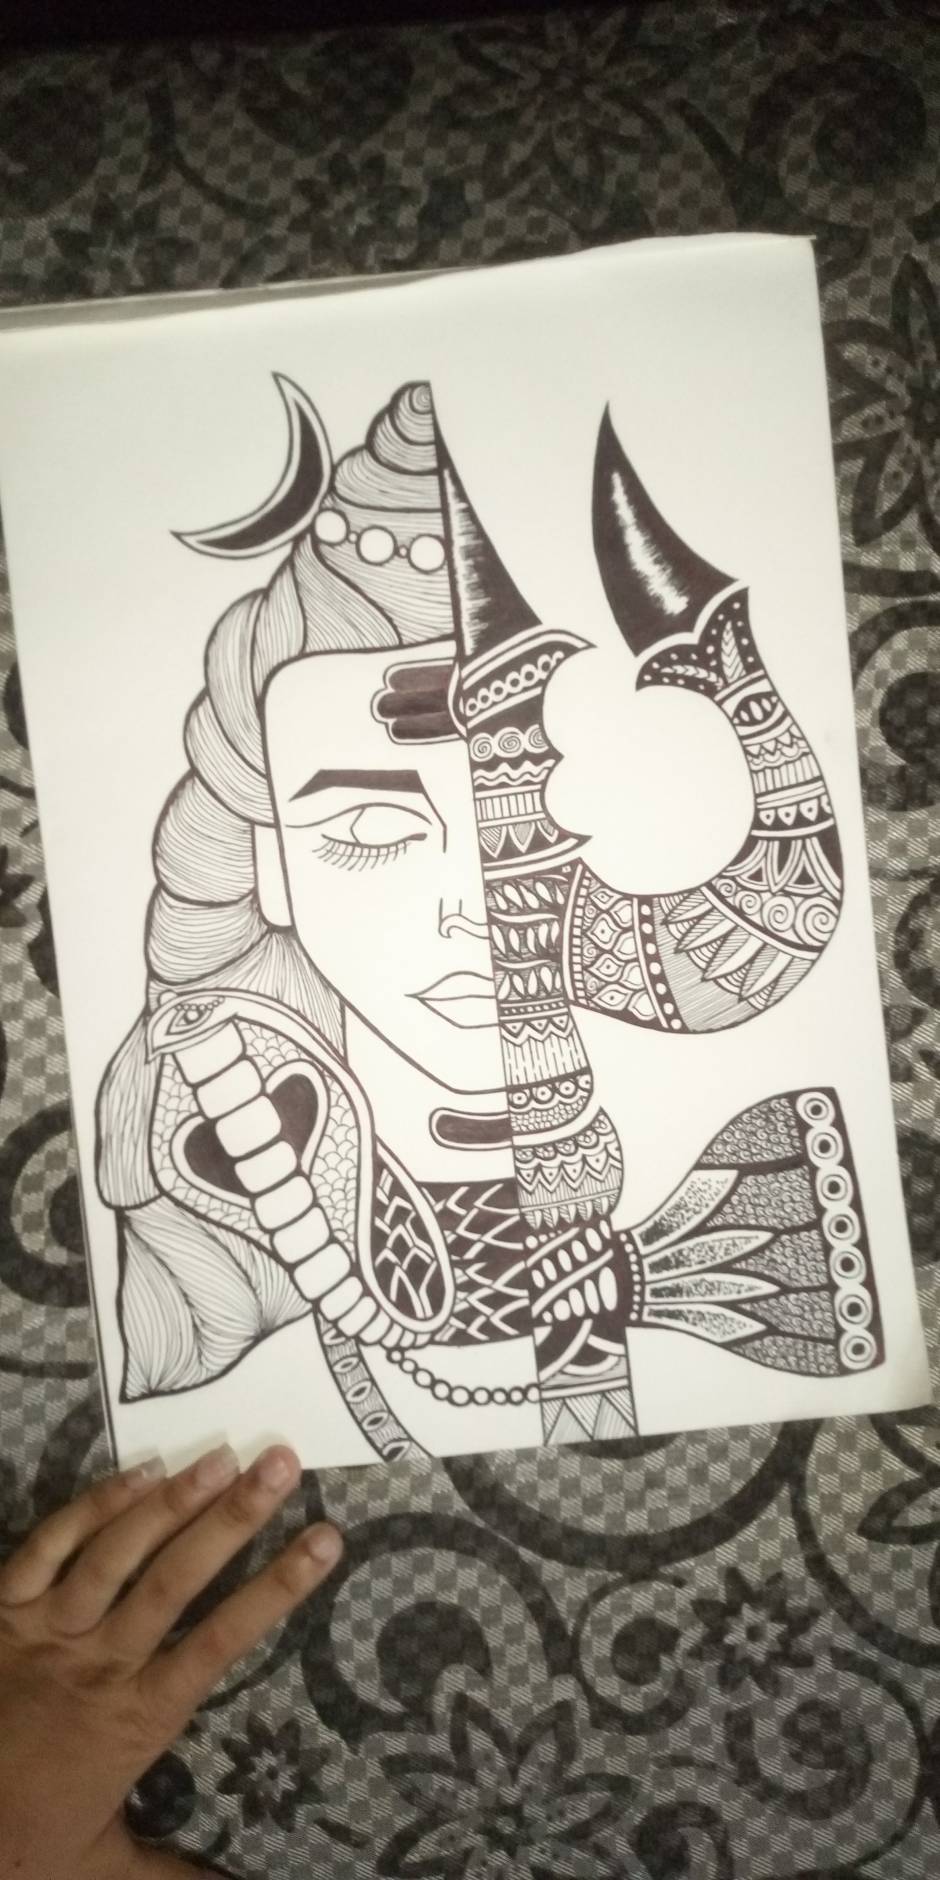 DS COMPANY DS MAHADEV PENCIL DRAWING Pencil 159 inch x 2185 inch  Painting Price in India  Buy DS COMPANY DS MAHADEV PENCIL DRAWING  Pencil 159 inch x 2185 inch Painting online at Flipkartcom